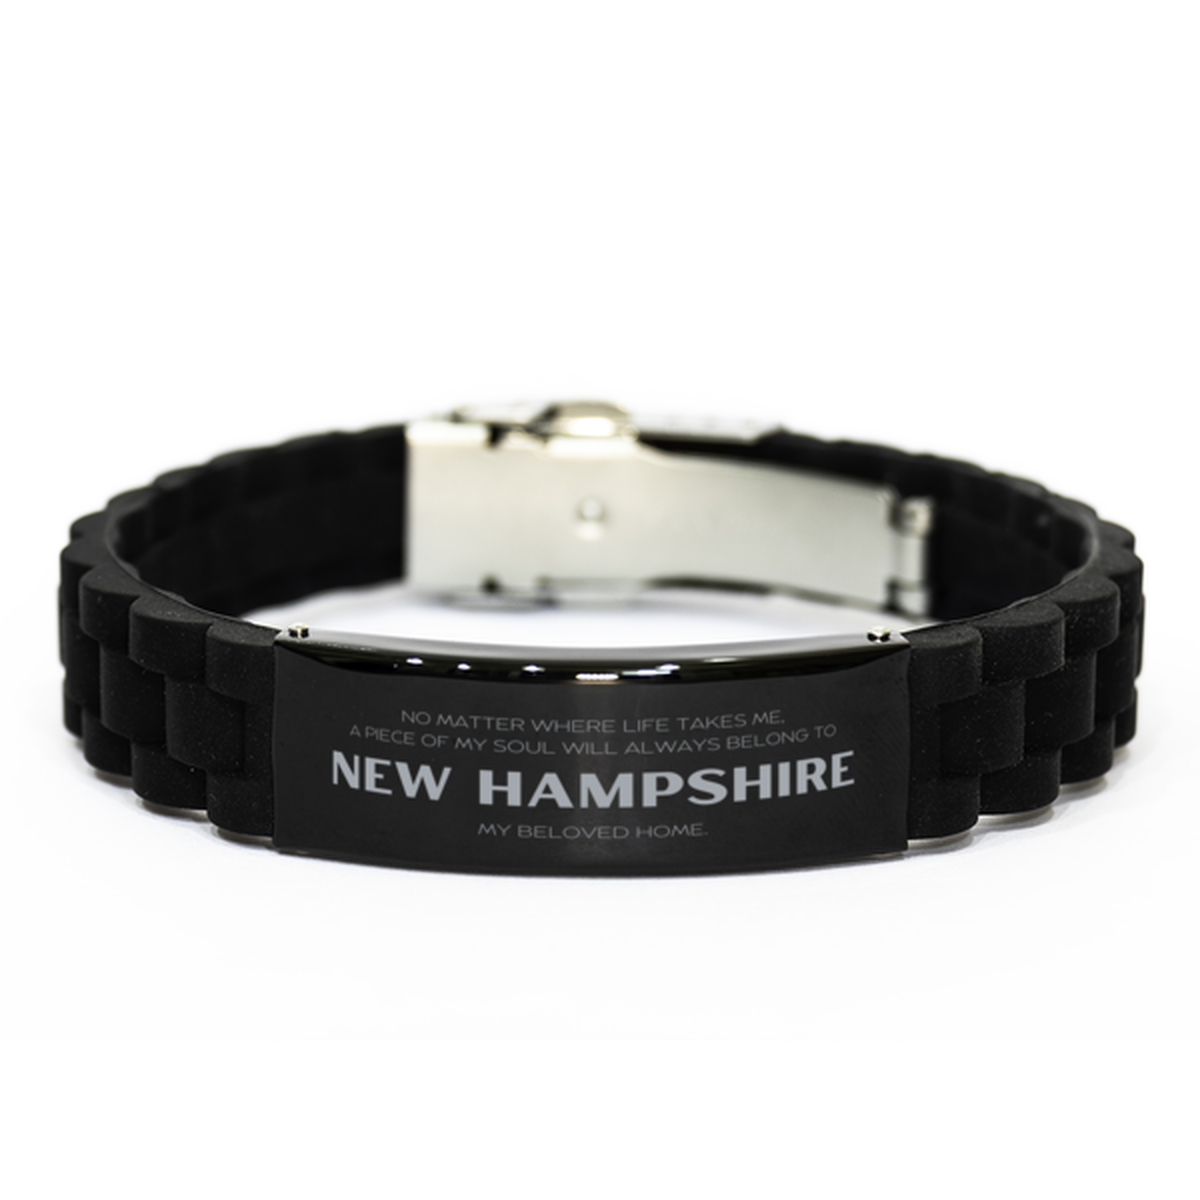 Love New Hampshire State Gifts, My soul will always belong to New Hampshire, Proud Black Glidelock Clasp Bracelet, Birthday Unique Gifts For New Hampshire Men, Women, Friends